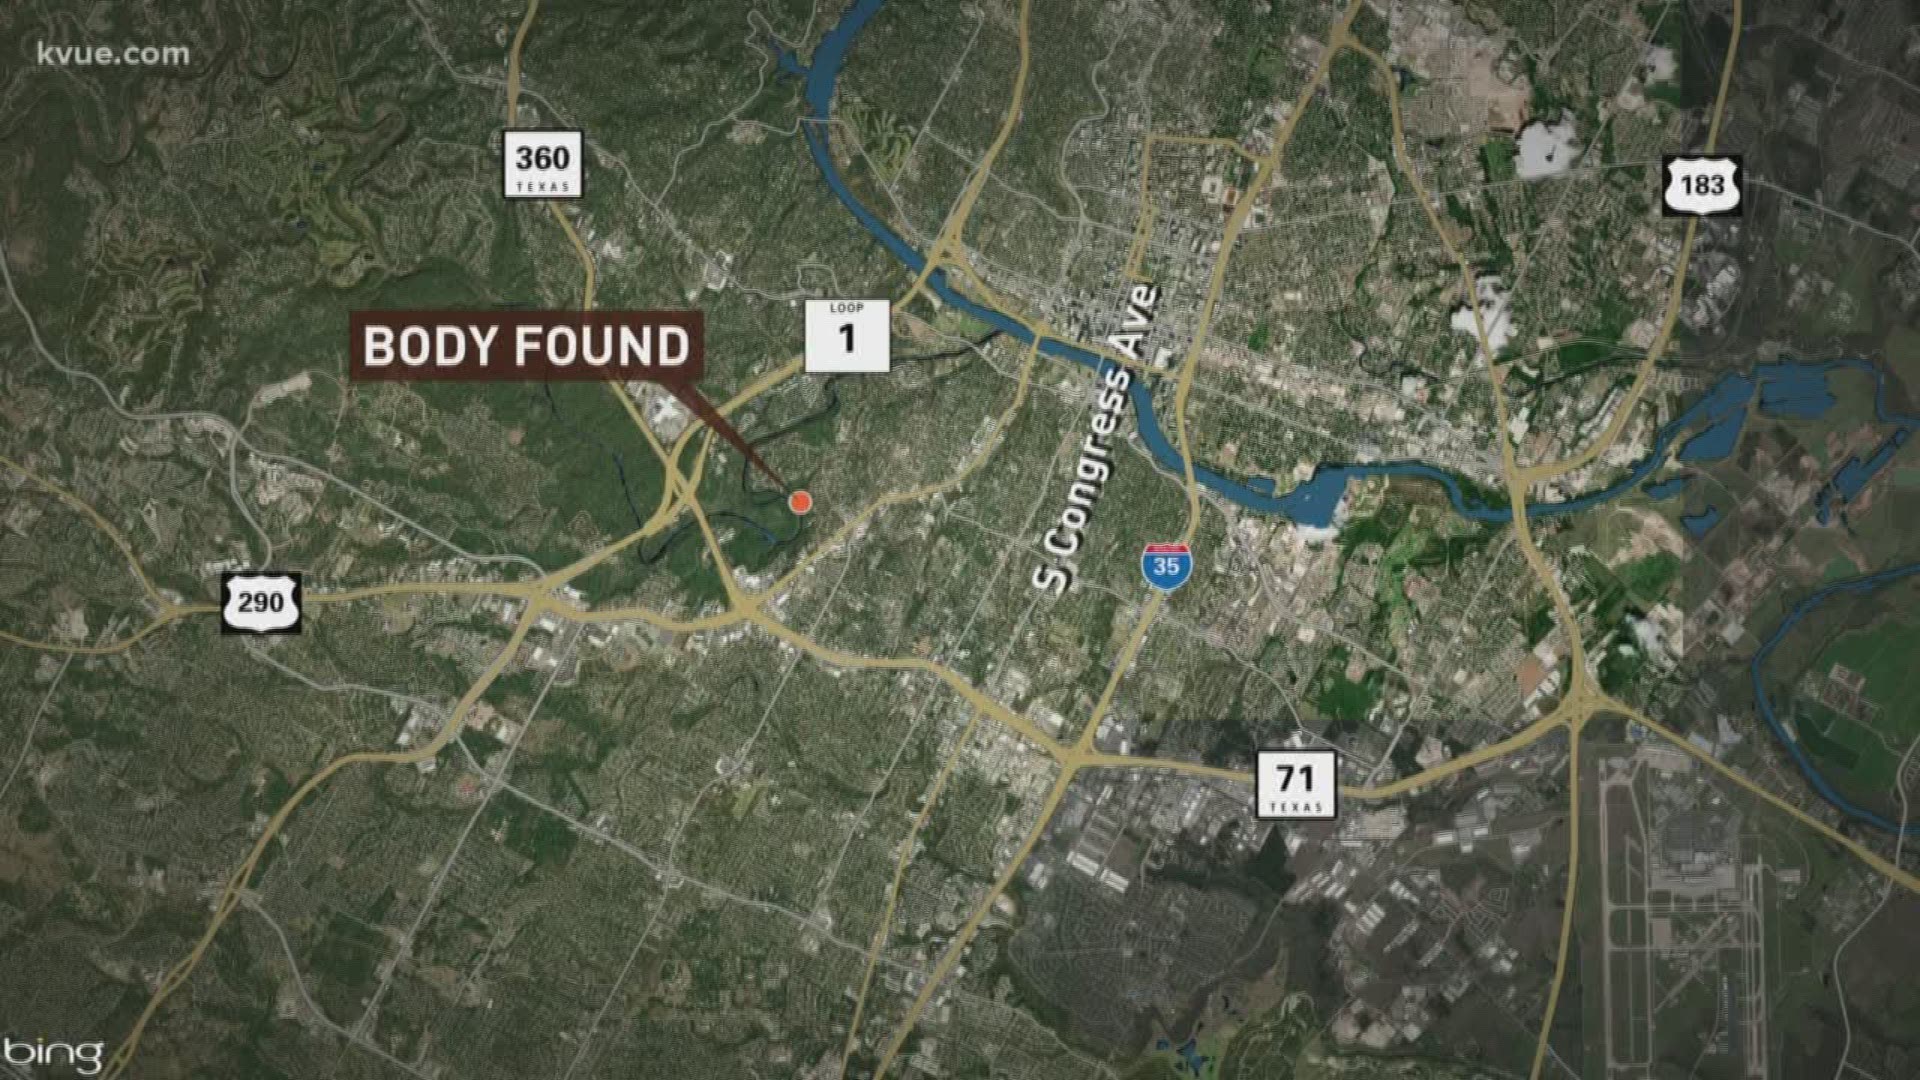 A body was found in the Barton Creek Greenbelt, according to ATCEMS.